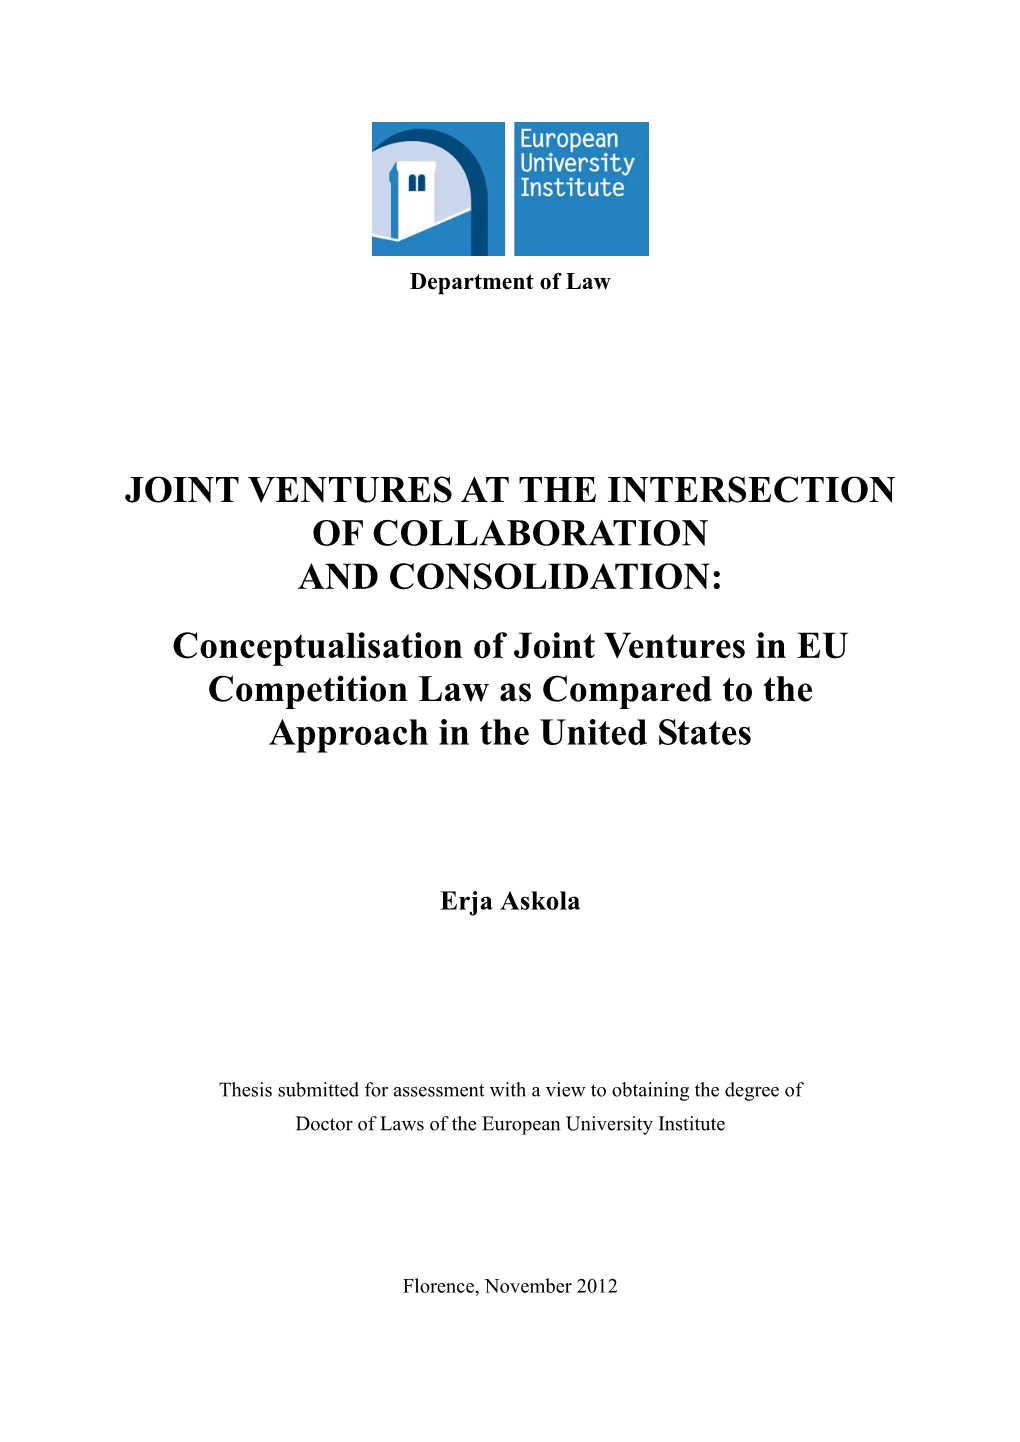 Conceptualisation of Joint Ventures in EU Competition Law As Compared to the Approach in the United States